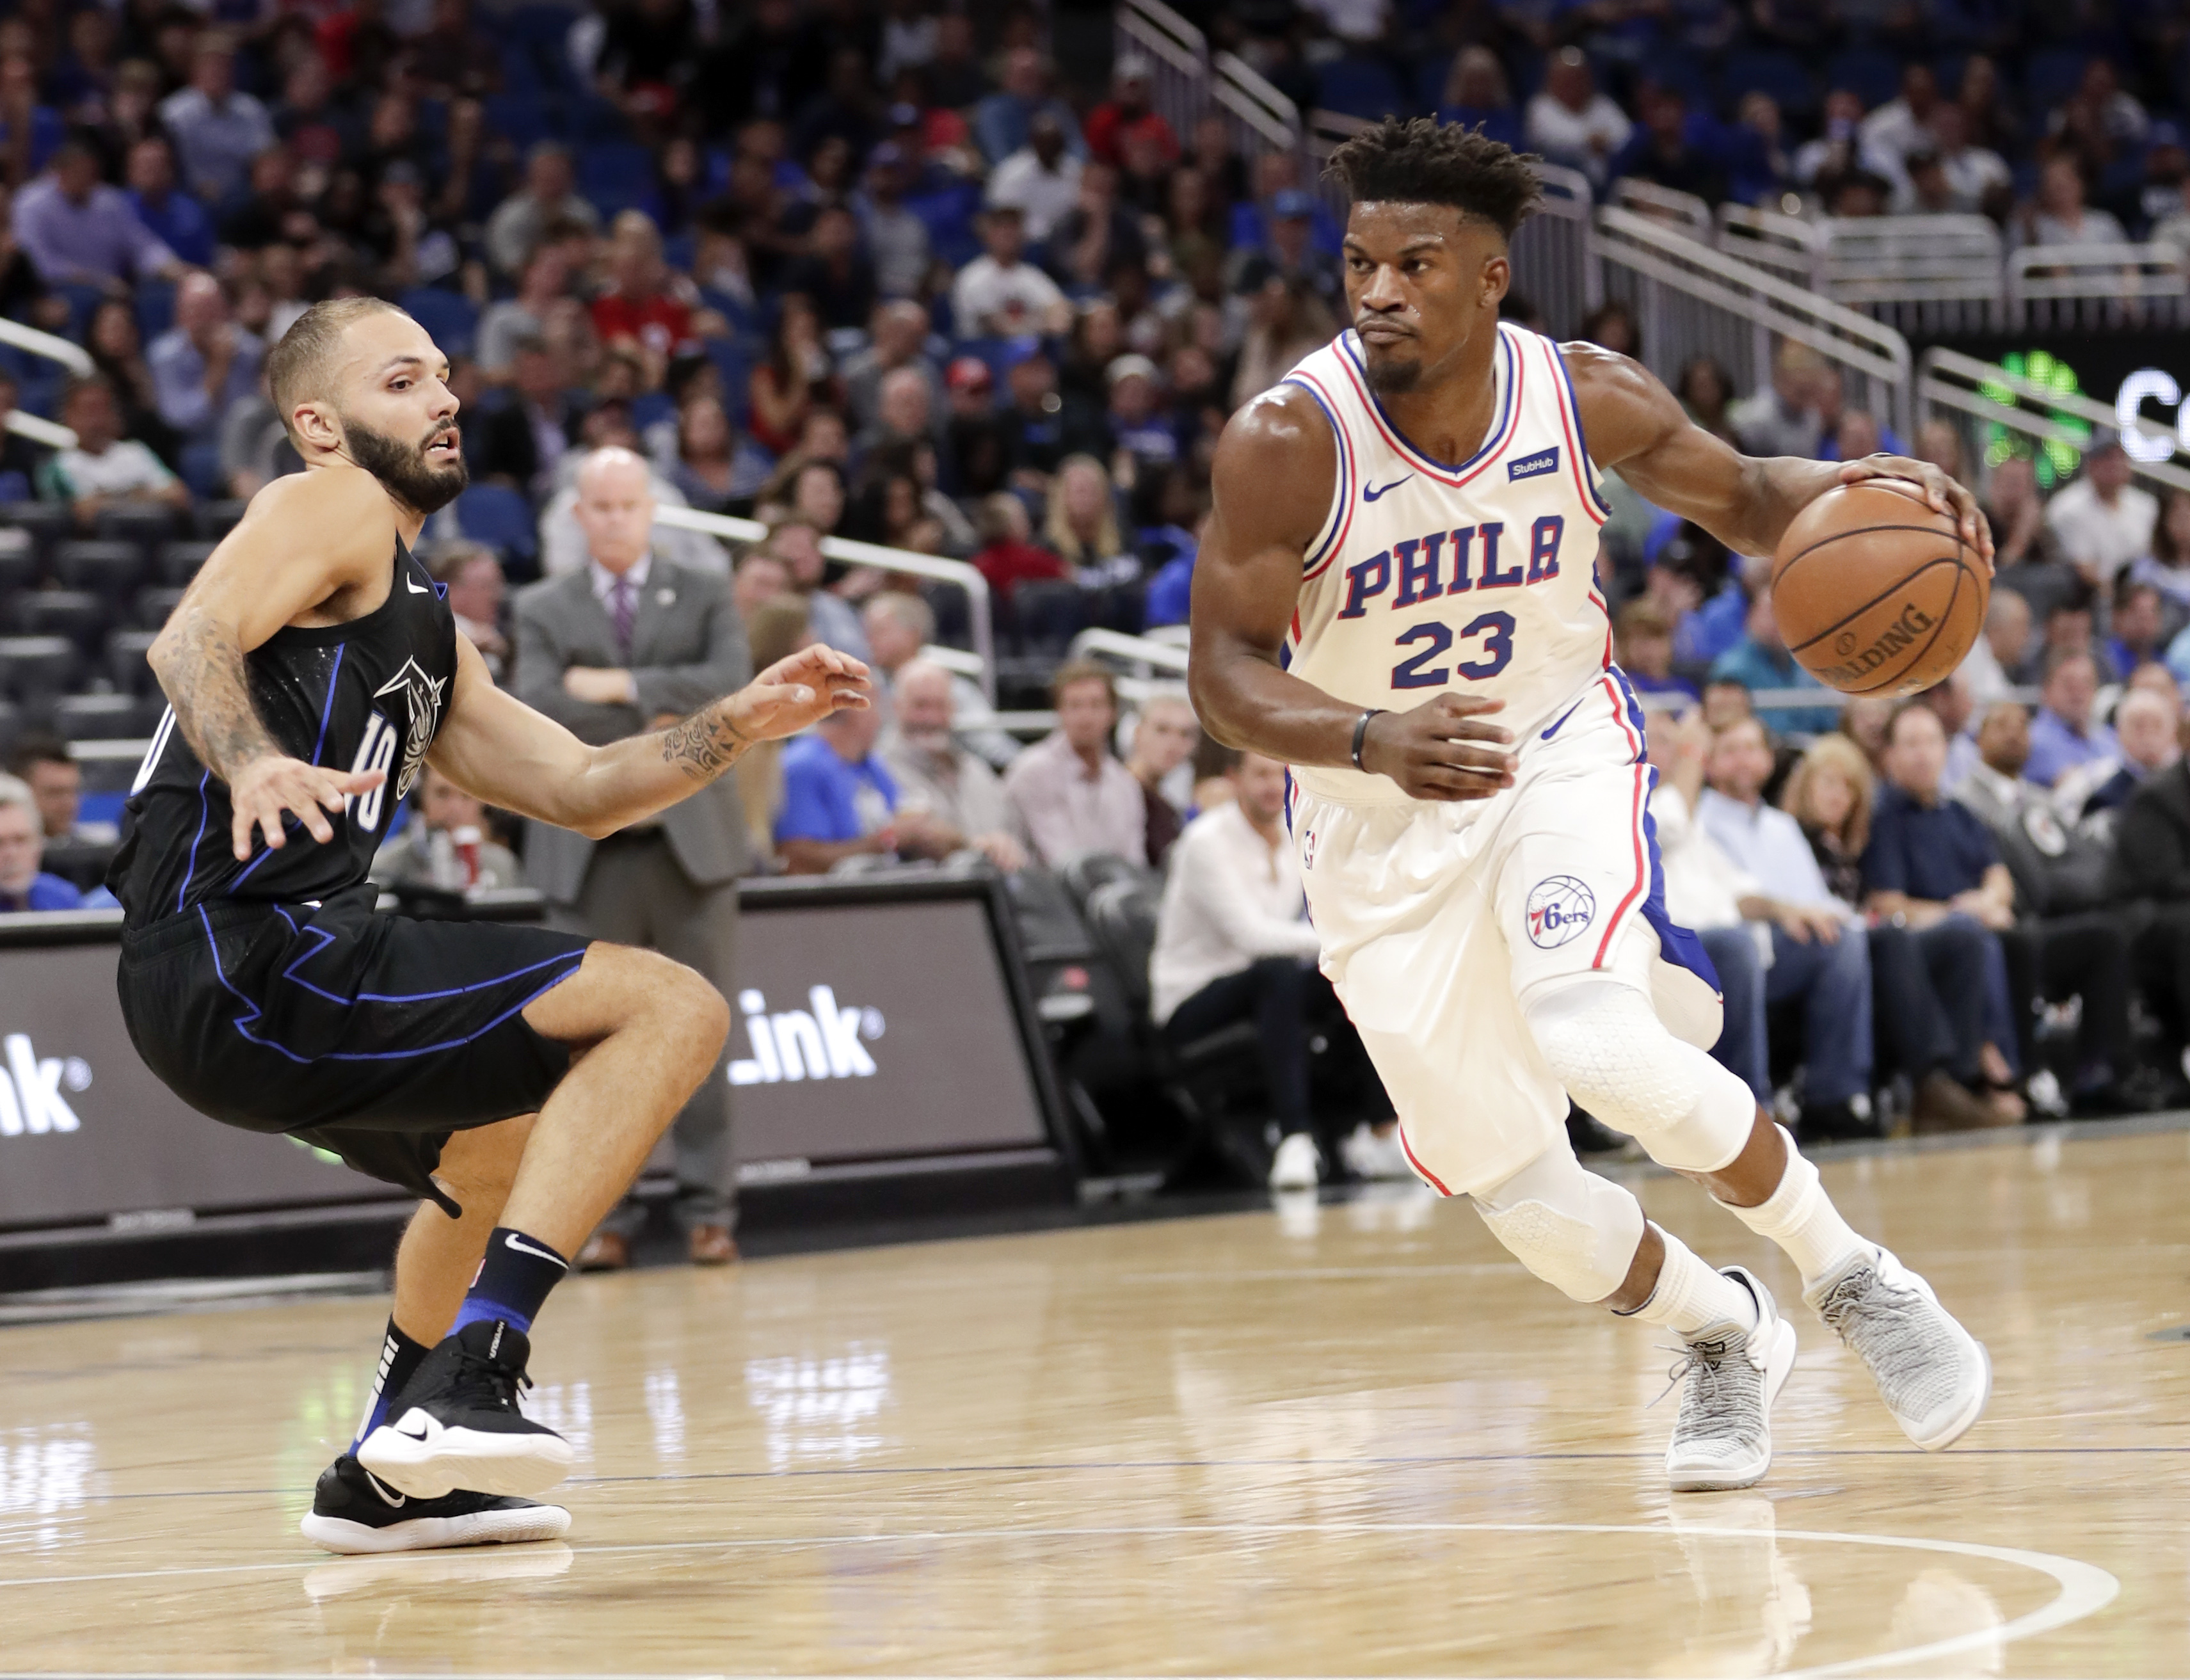 Magic come back to beat 76ers 111-106 in Butler’s debut